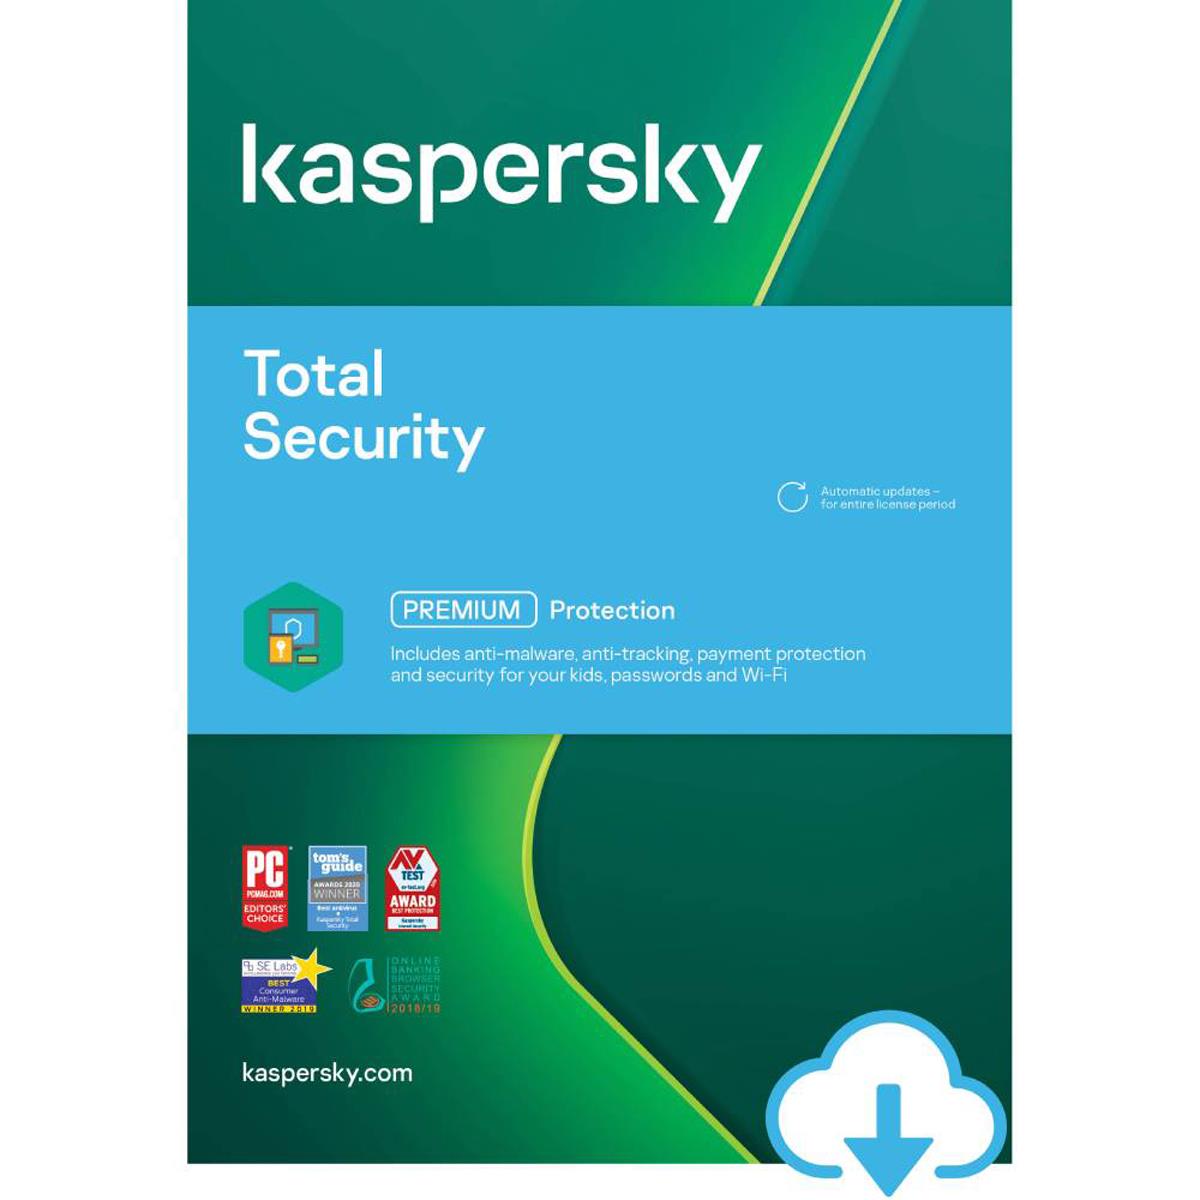 Image of Kaspersky 1-Year Total Security Software License